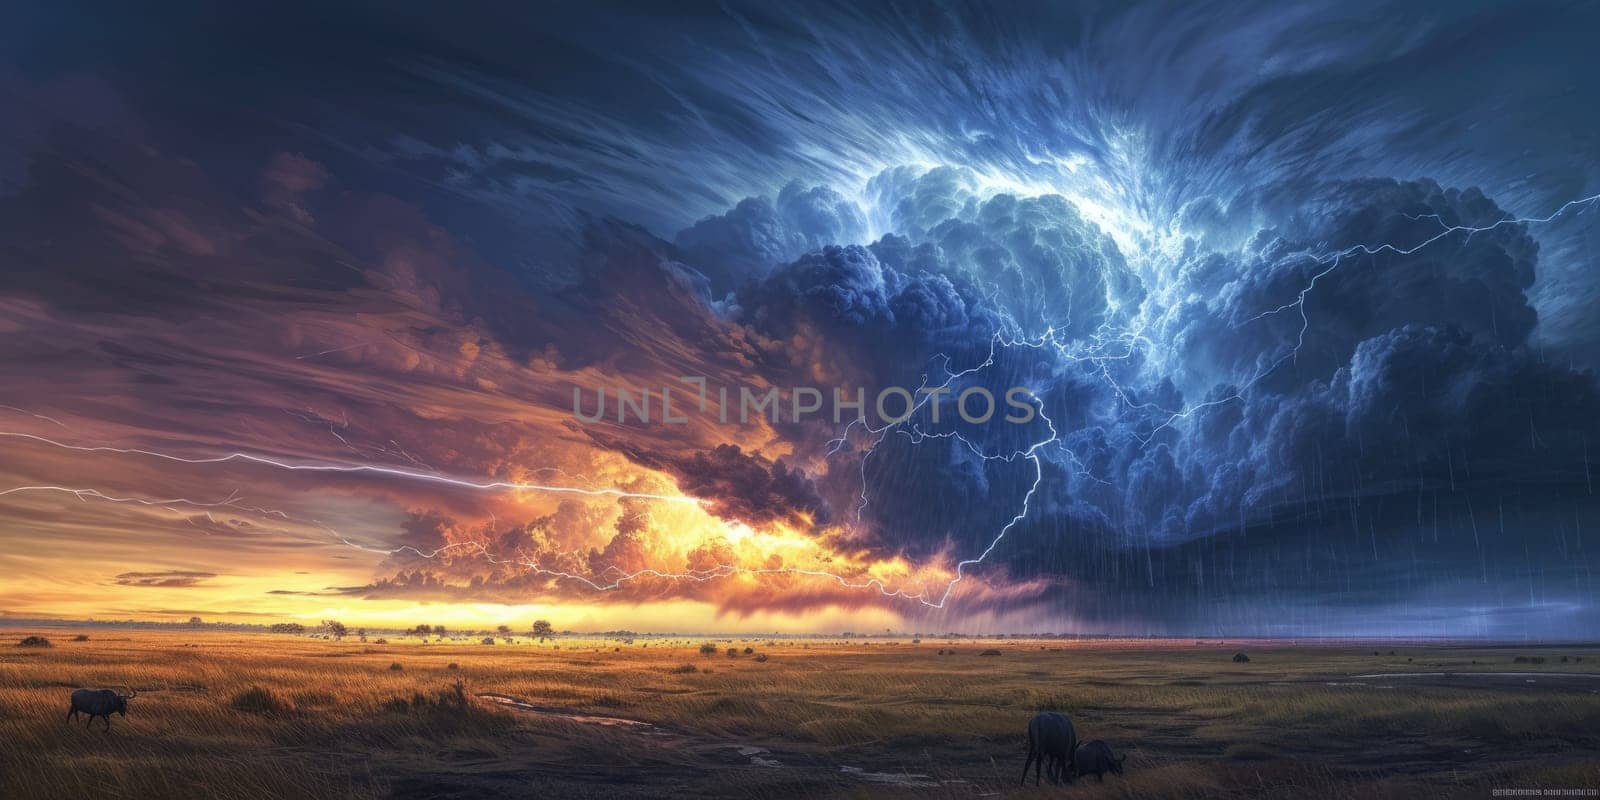 A vivid artwork of an African savannah scene, where the tranquility of a sunset is contrasted with the powerful drama of an approaching thunderstorm. Resplendent.